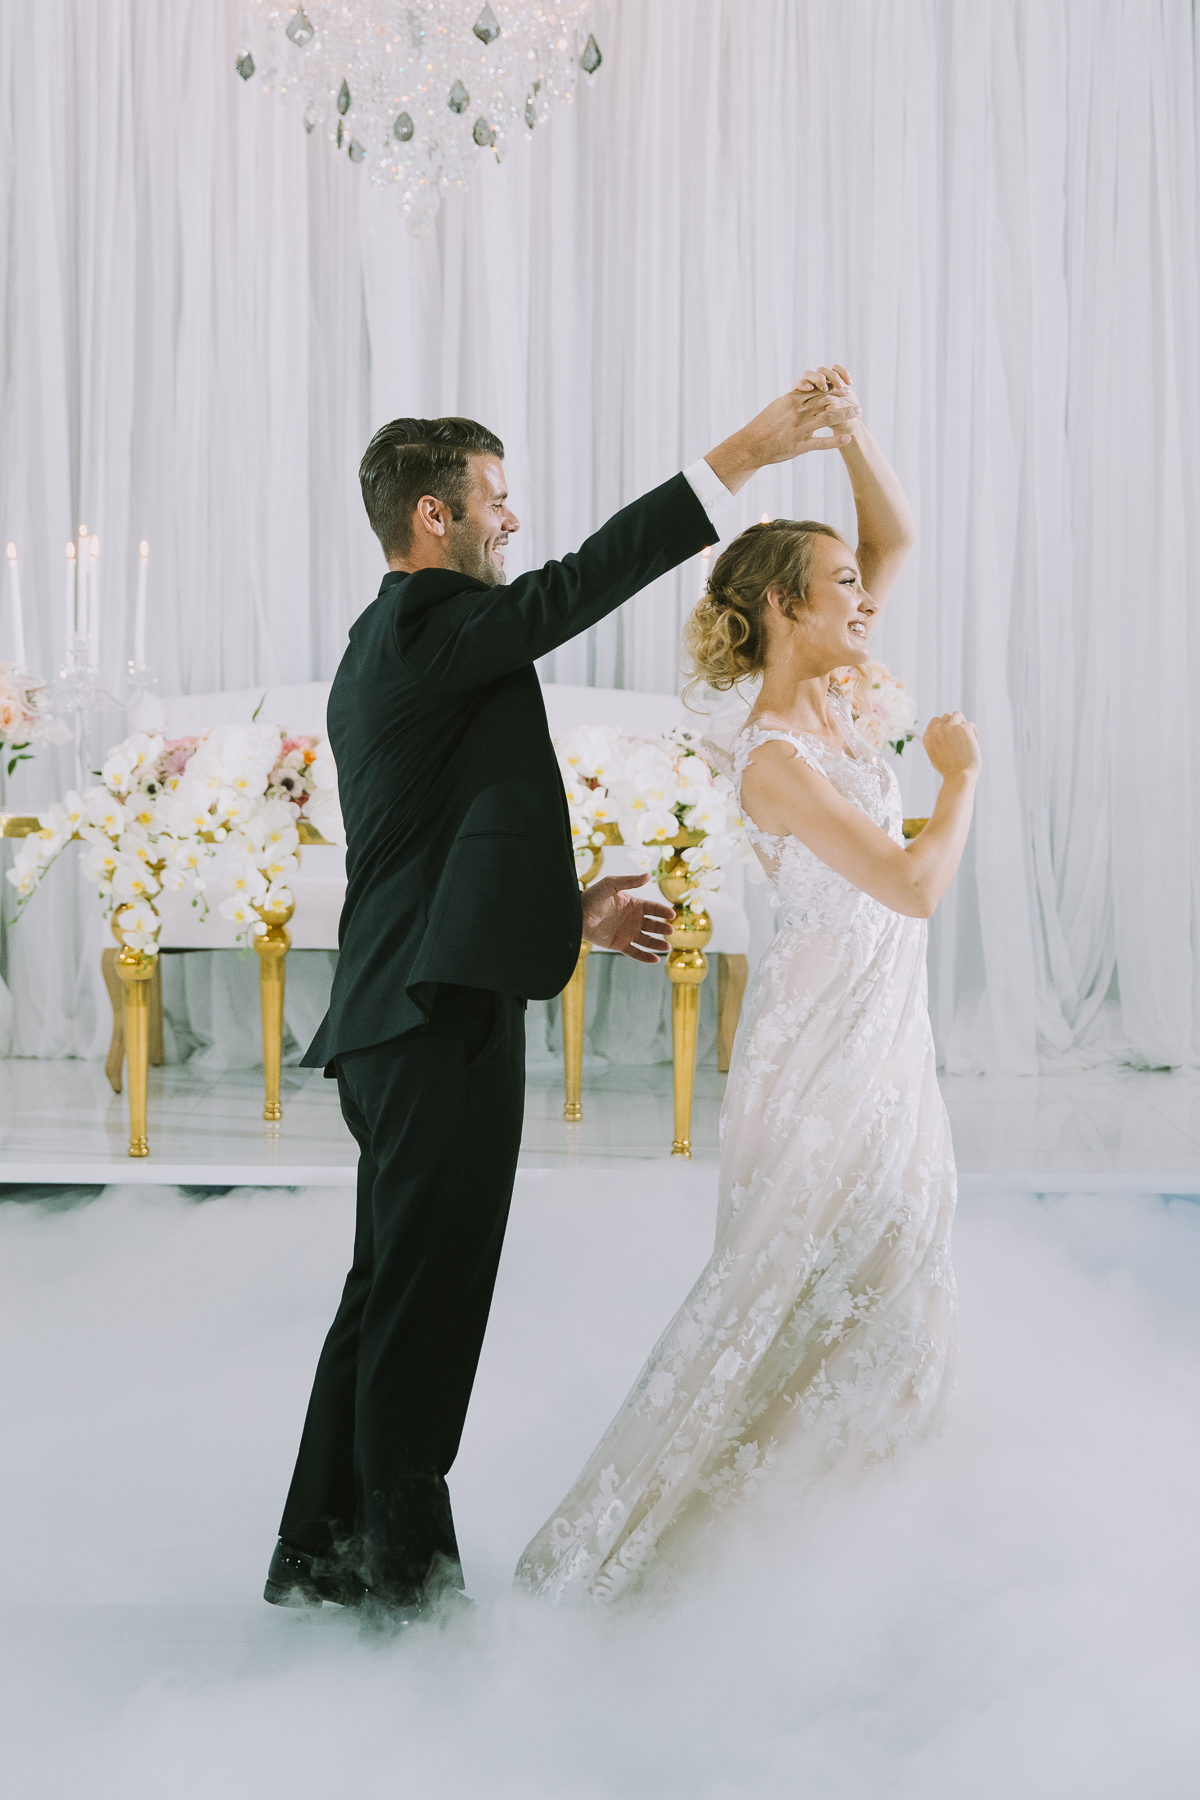 Light Up Your Memories With Indoor Wedding Photography